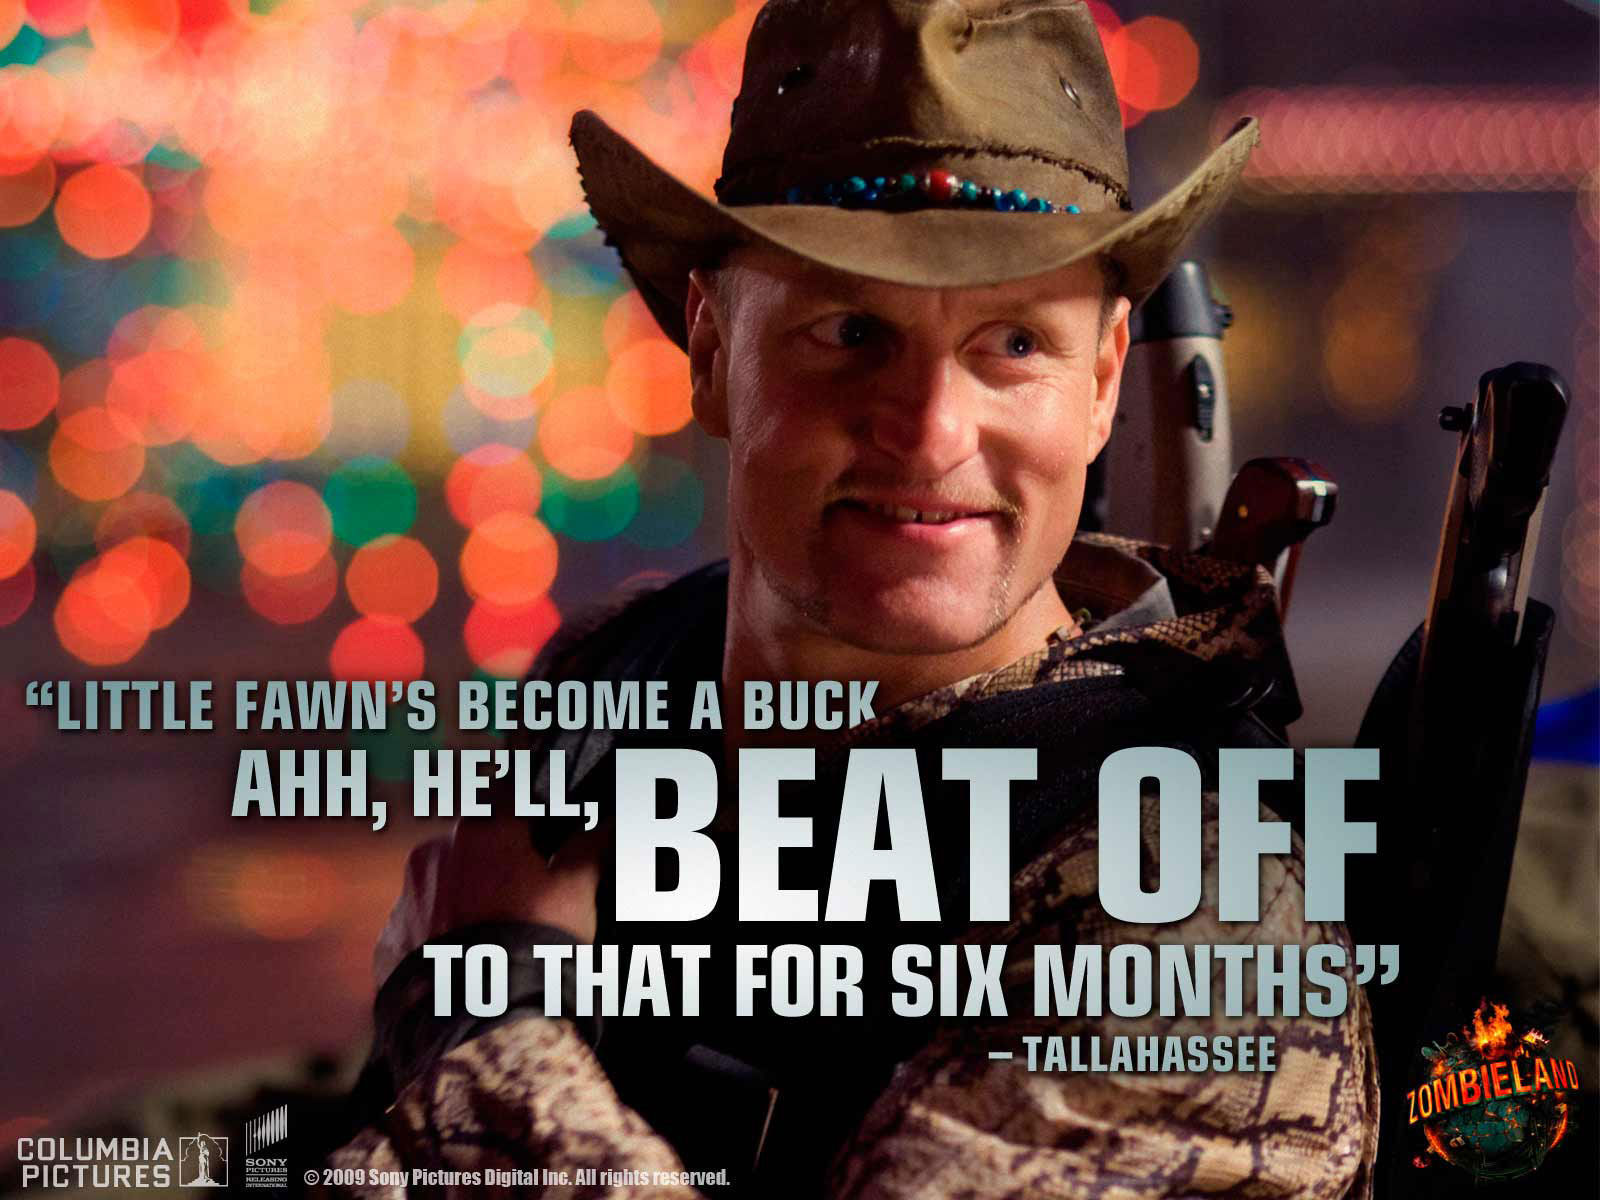 Tallahassee Quotes Zombieland Wallpaper